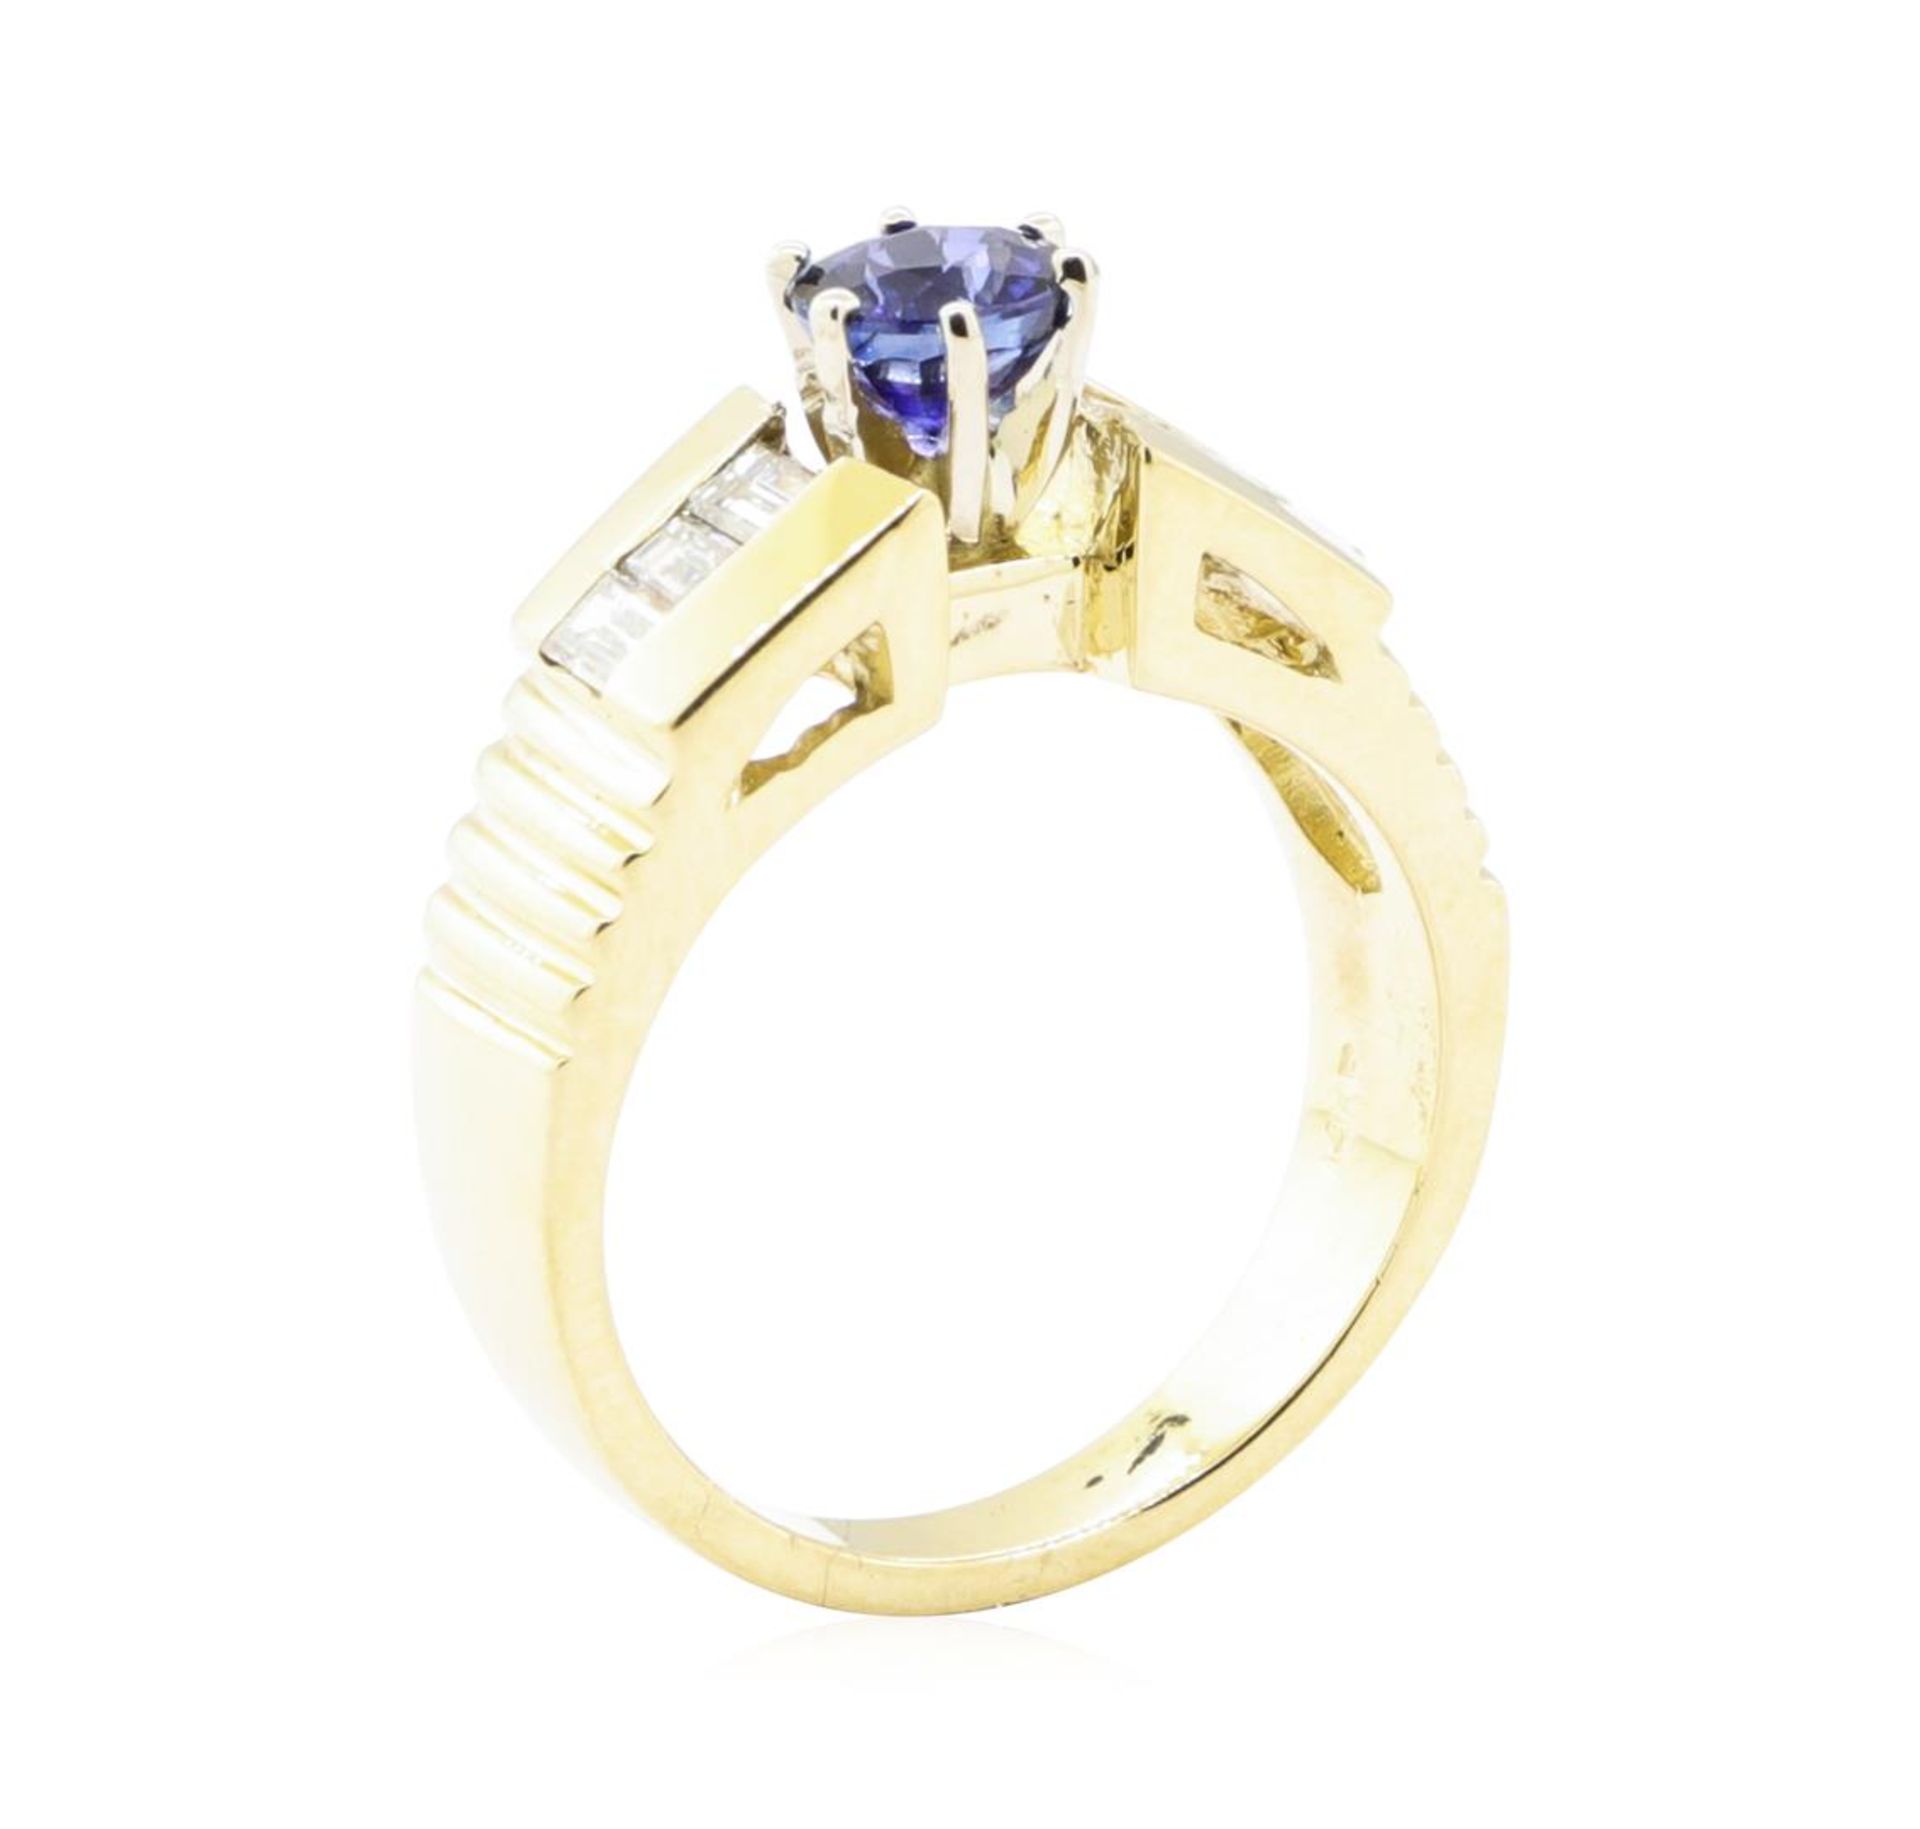 1.30 ctw Sapphire and Diamond Ring - 14KT Yellow Gold - Image 4 of 4